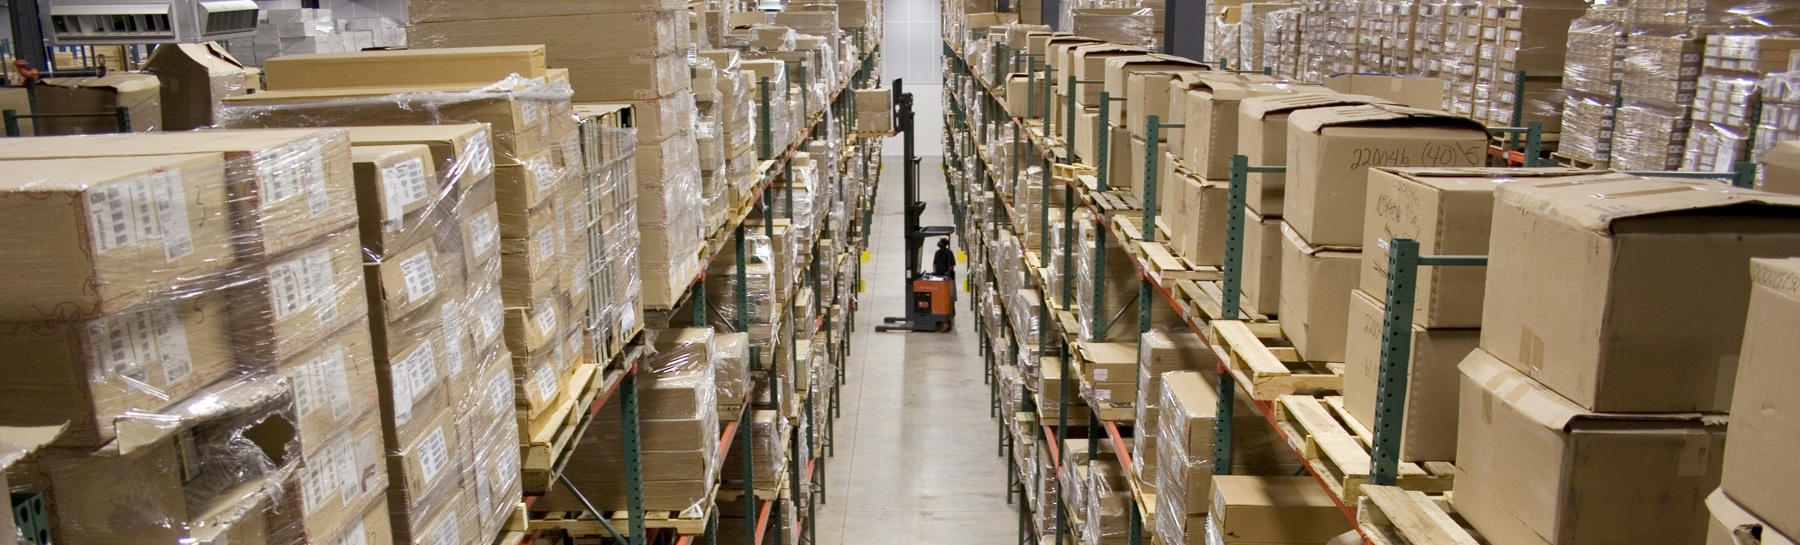 Repackaging services and trusted 3PL providers repacking warehousing and storage